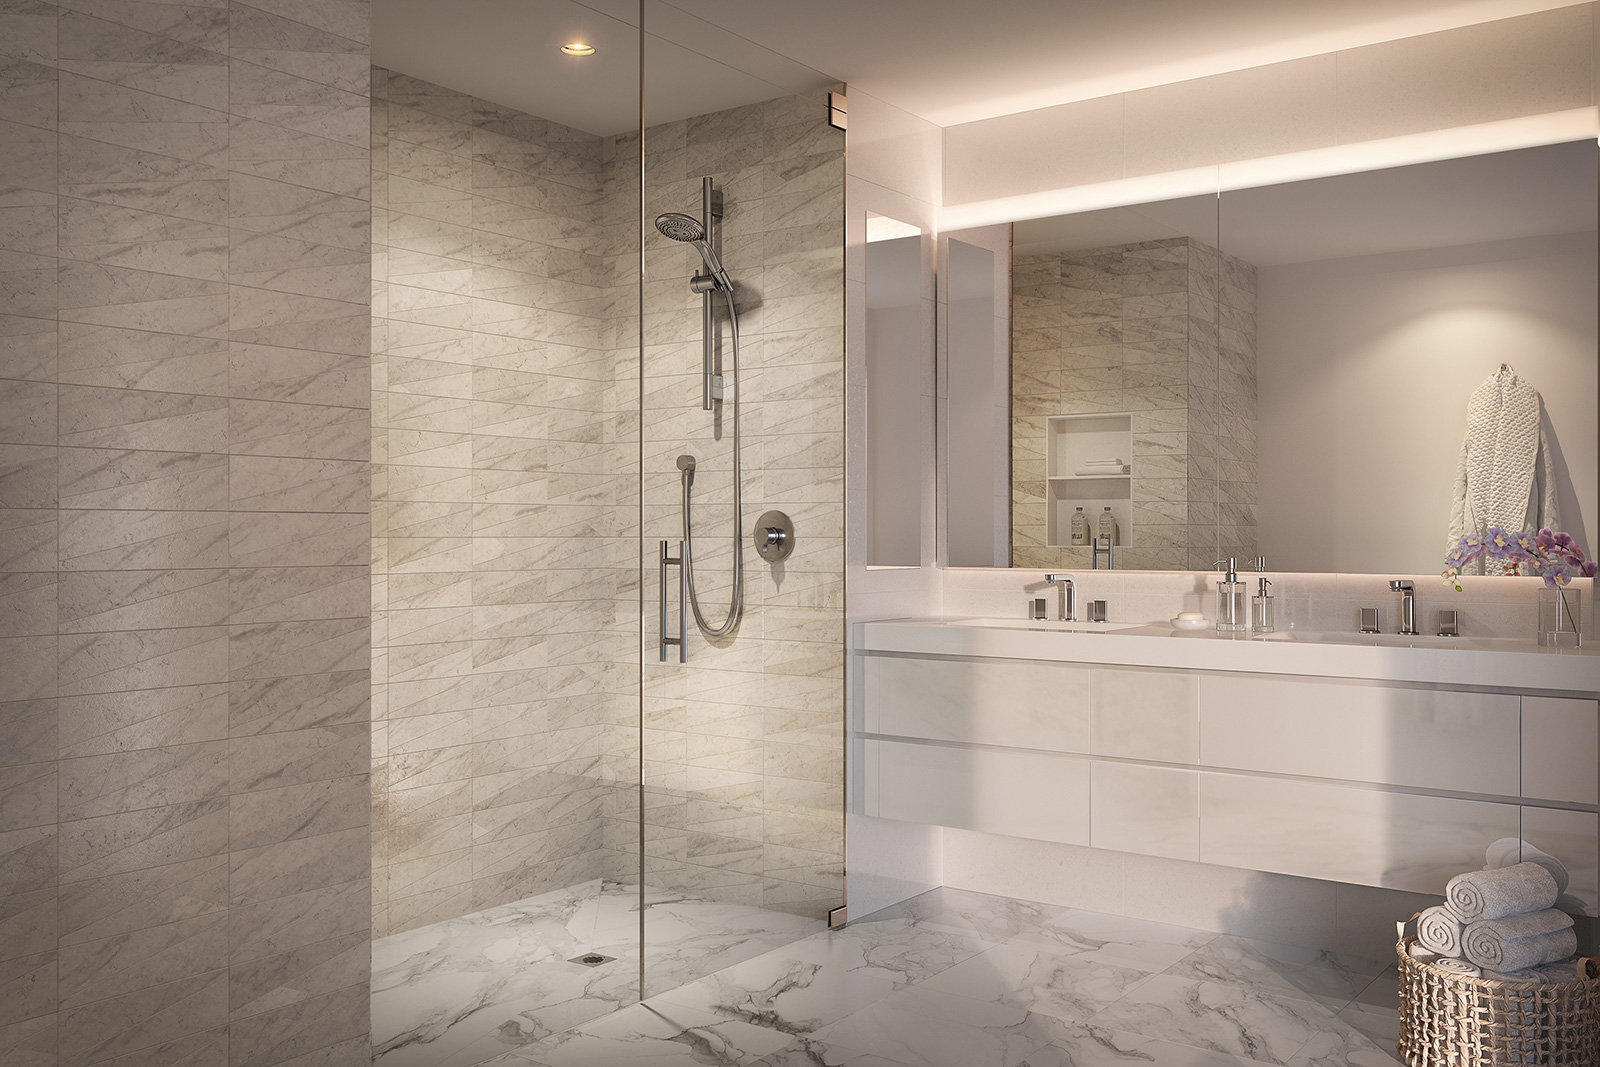 ARO features spa-inspired baths for residents.